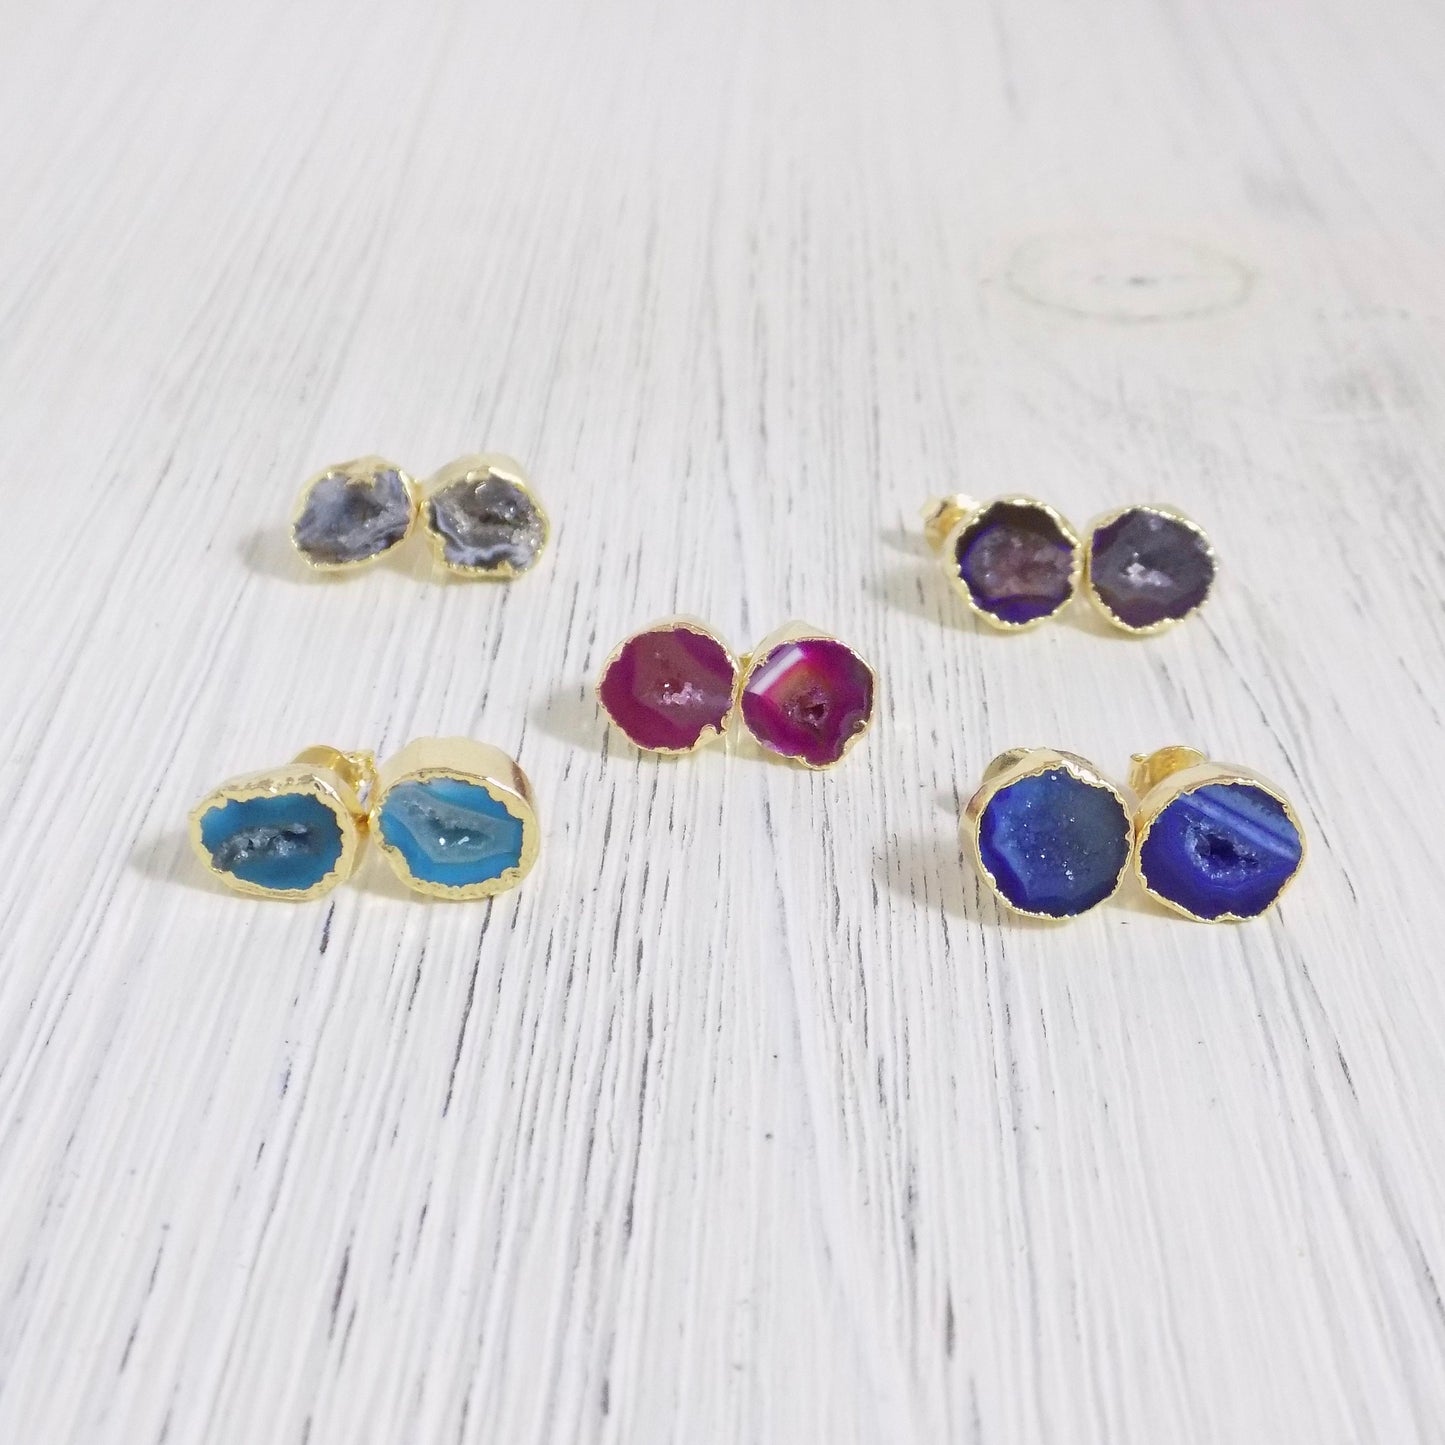 Colorful Geode Earrings Stud - Mothers Day Gift For Her